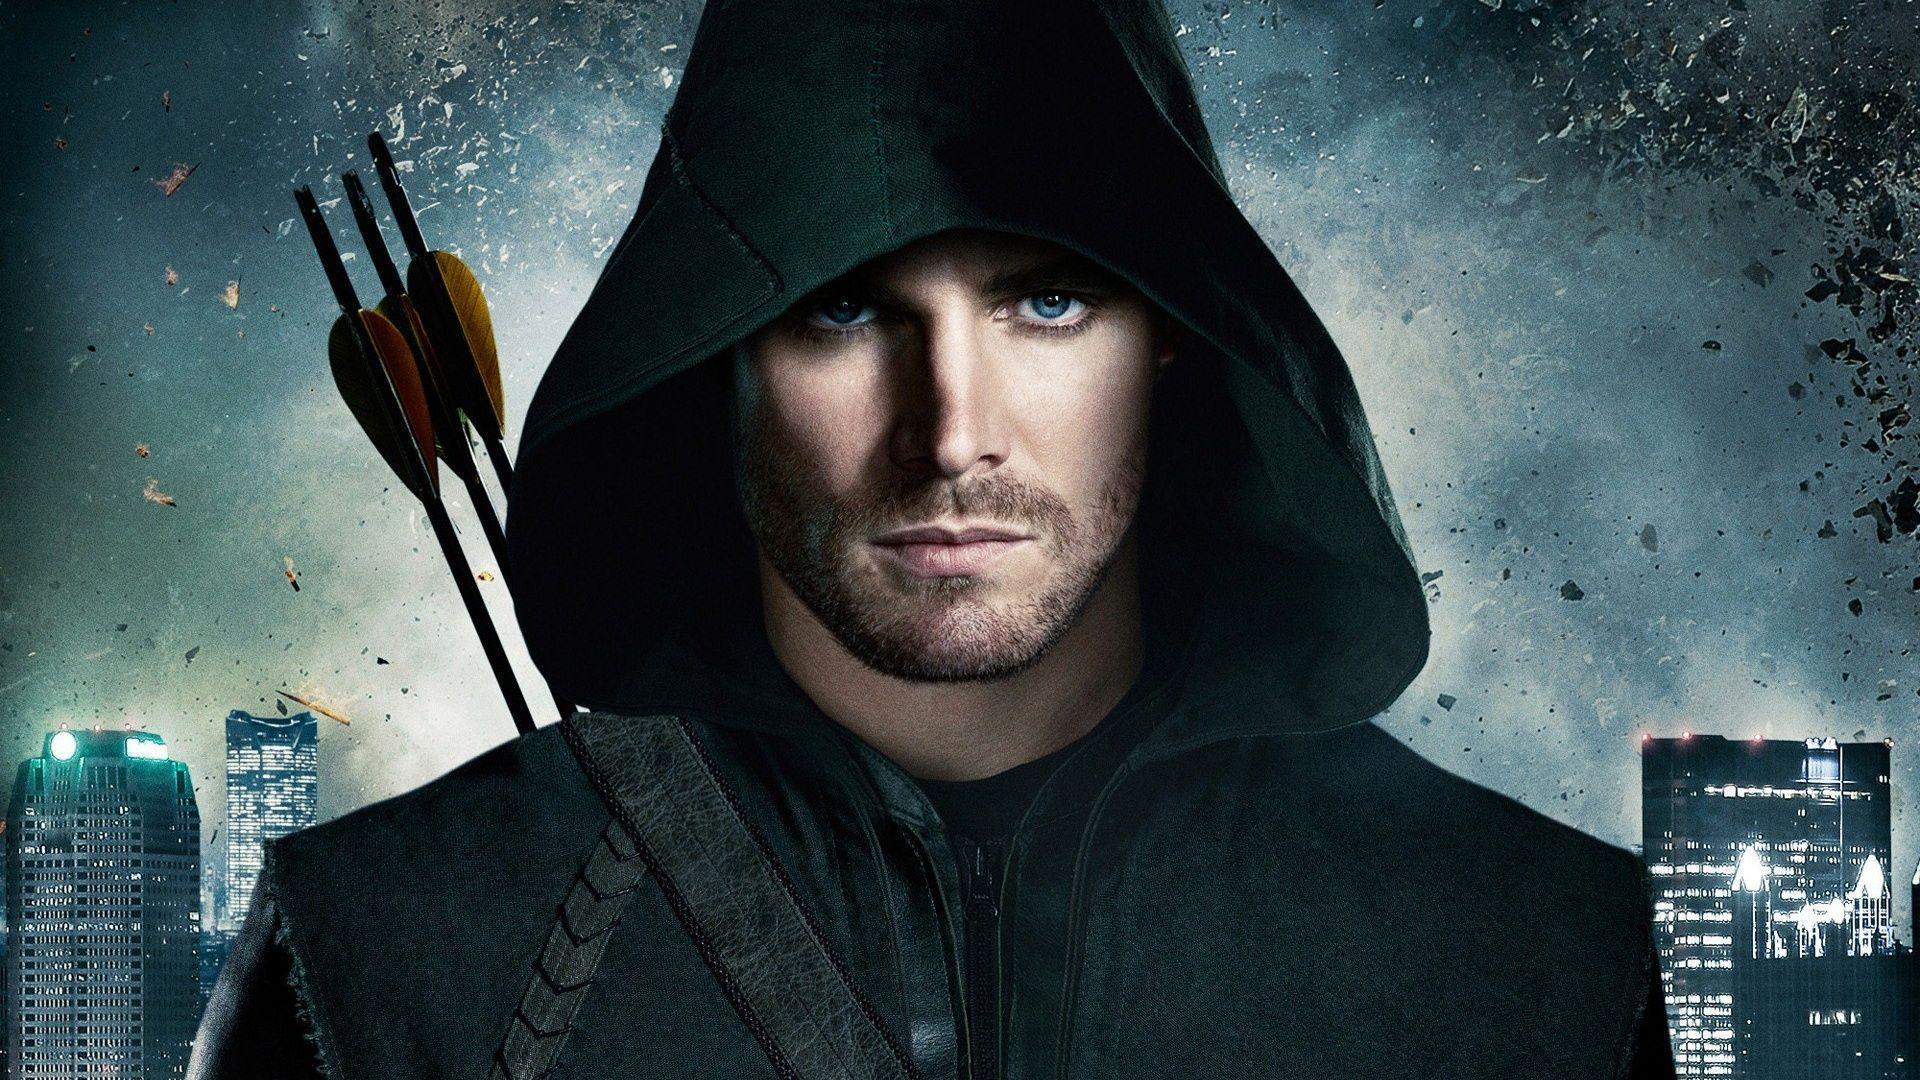 HD Wallpaper Stephen Amell high quality and definition